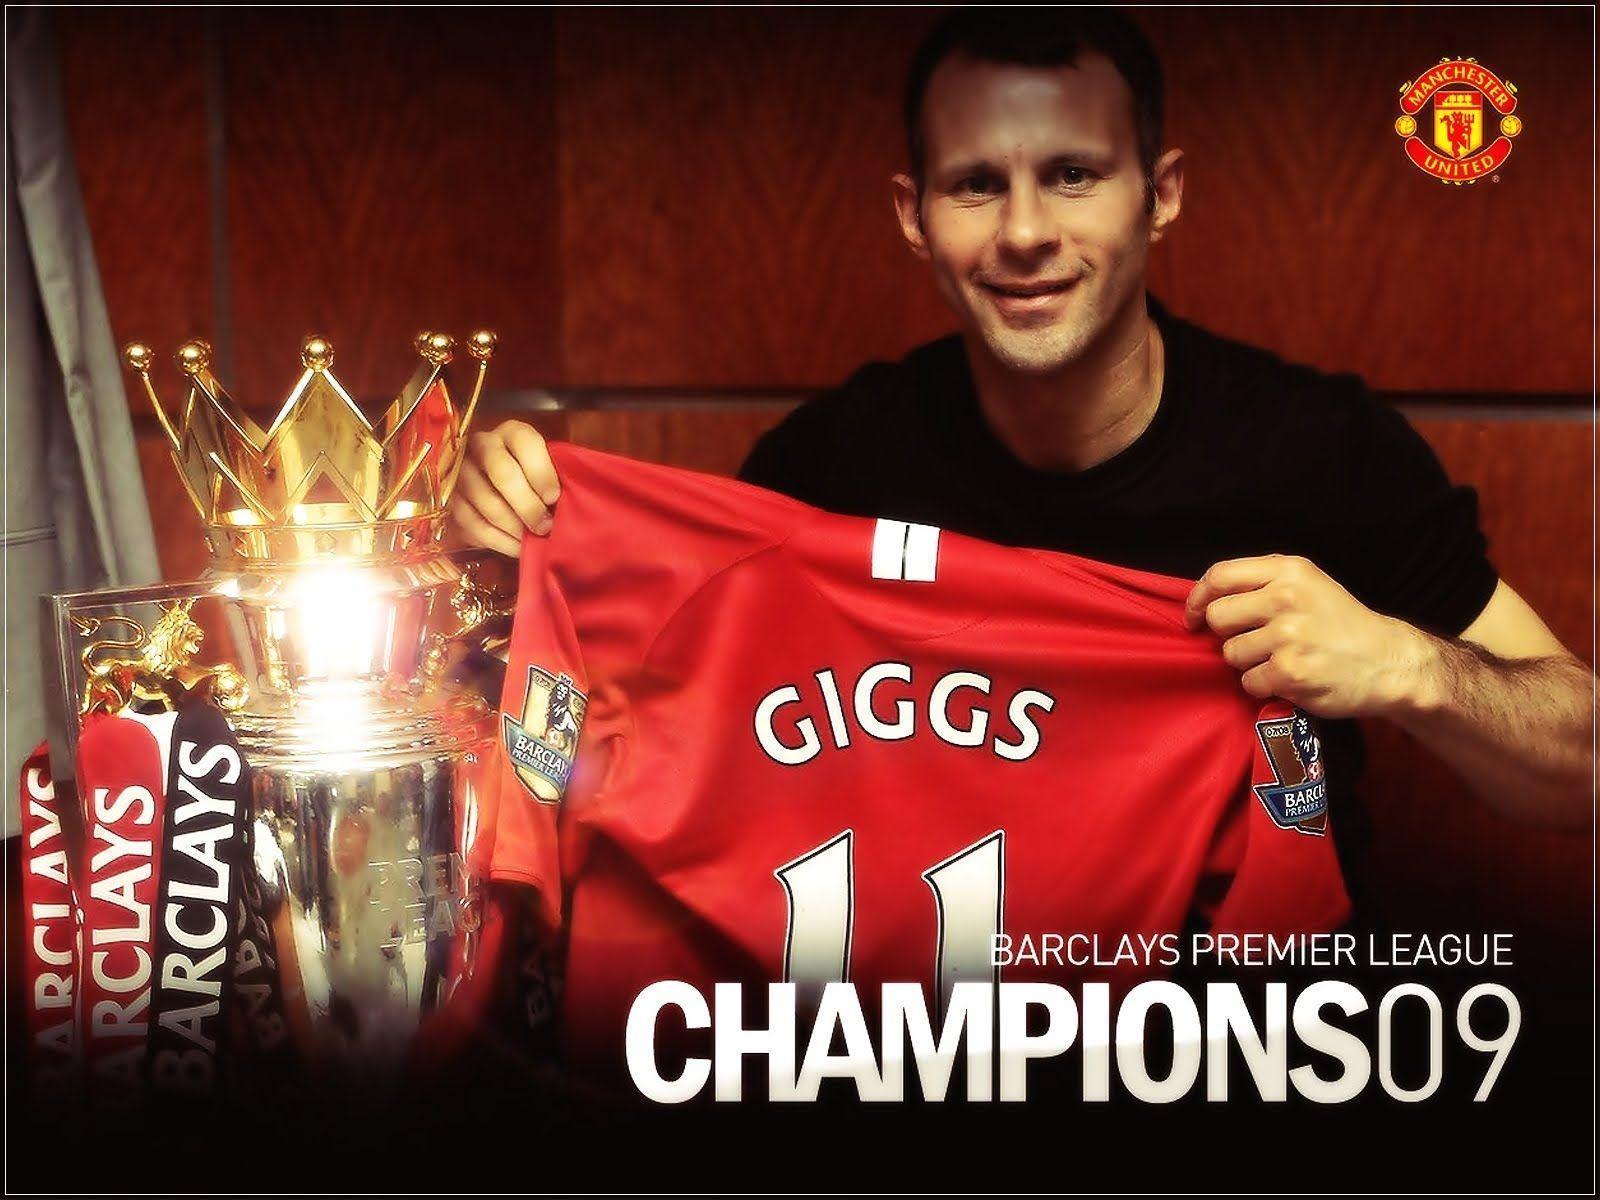 Manchester United Wallpaper For Android: Ryan Giggs Wallpaper 2011